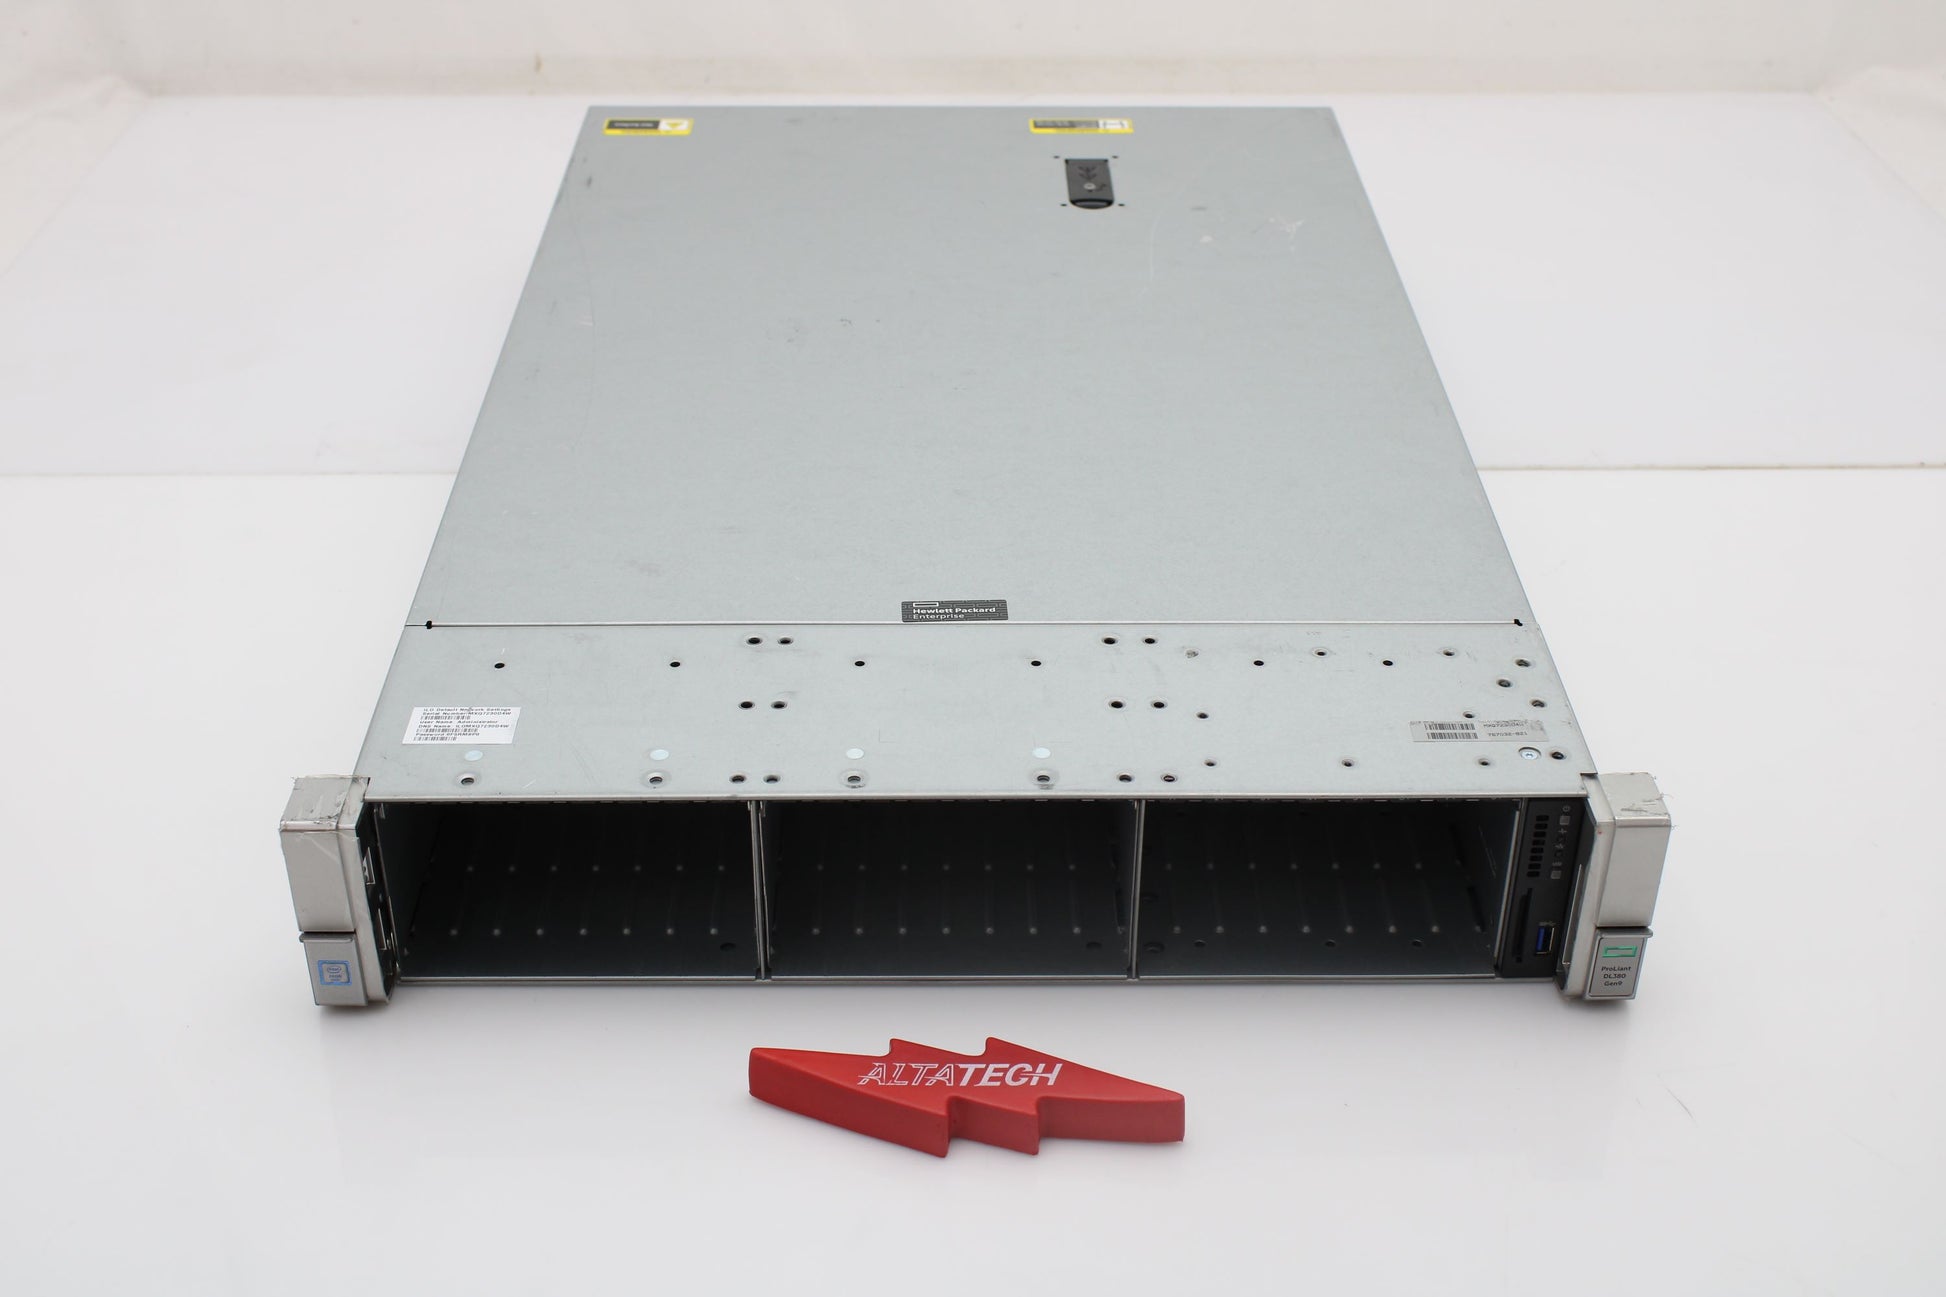 HP 767032-B21 ProLiant DL380 G9 24x SFF CTO Server Chassis, Used